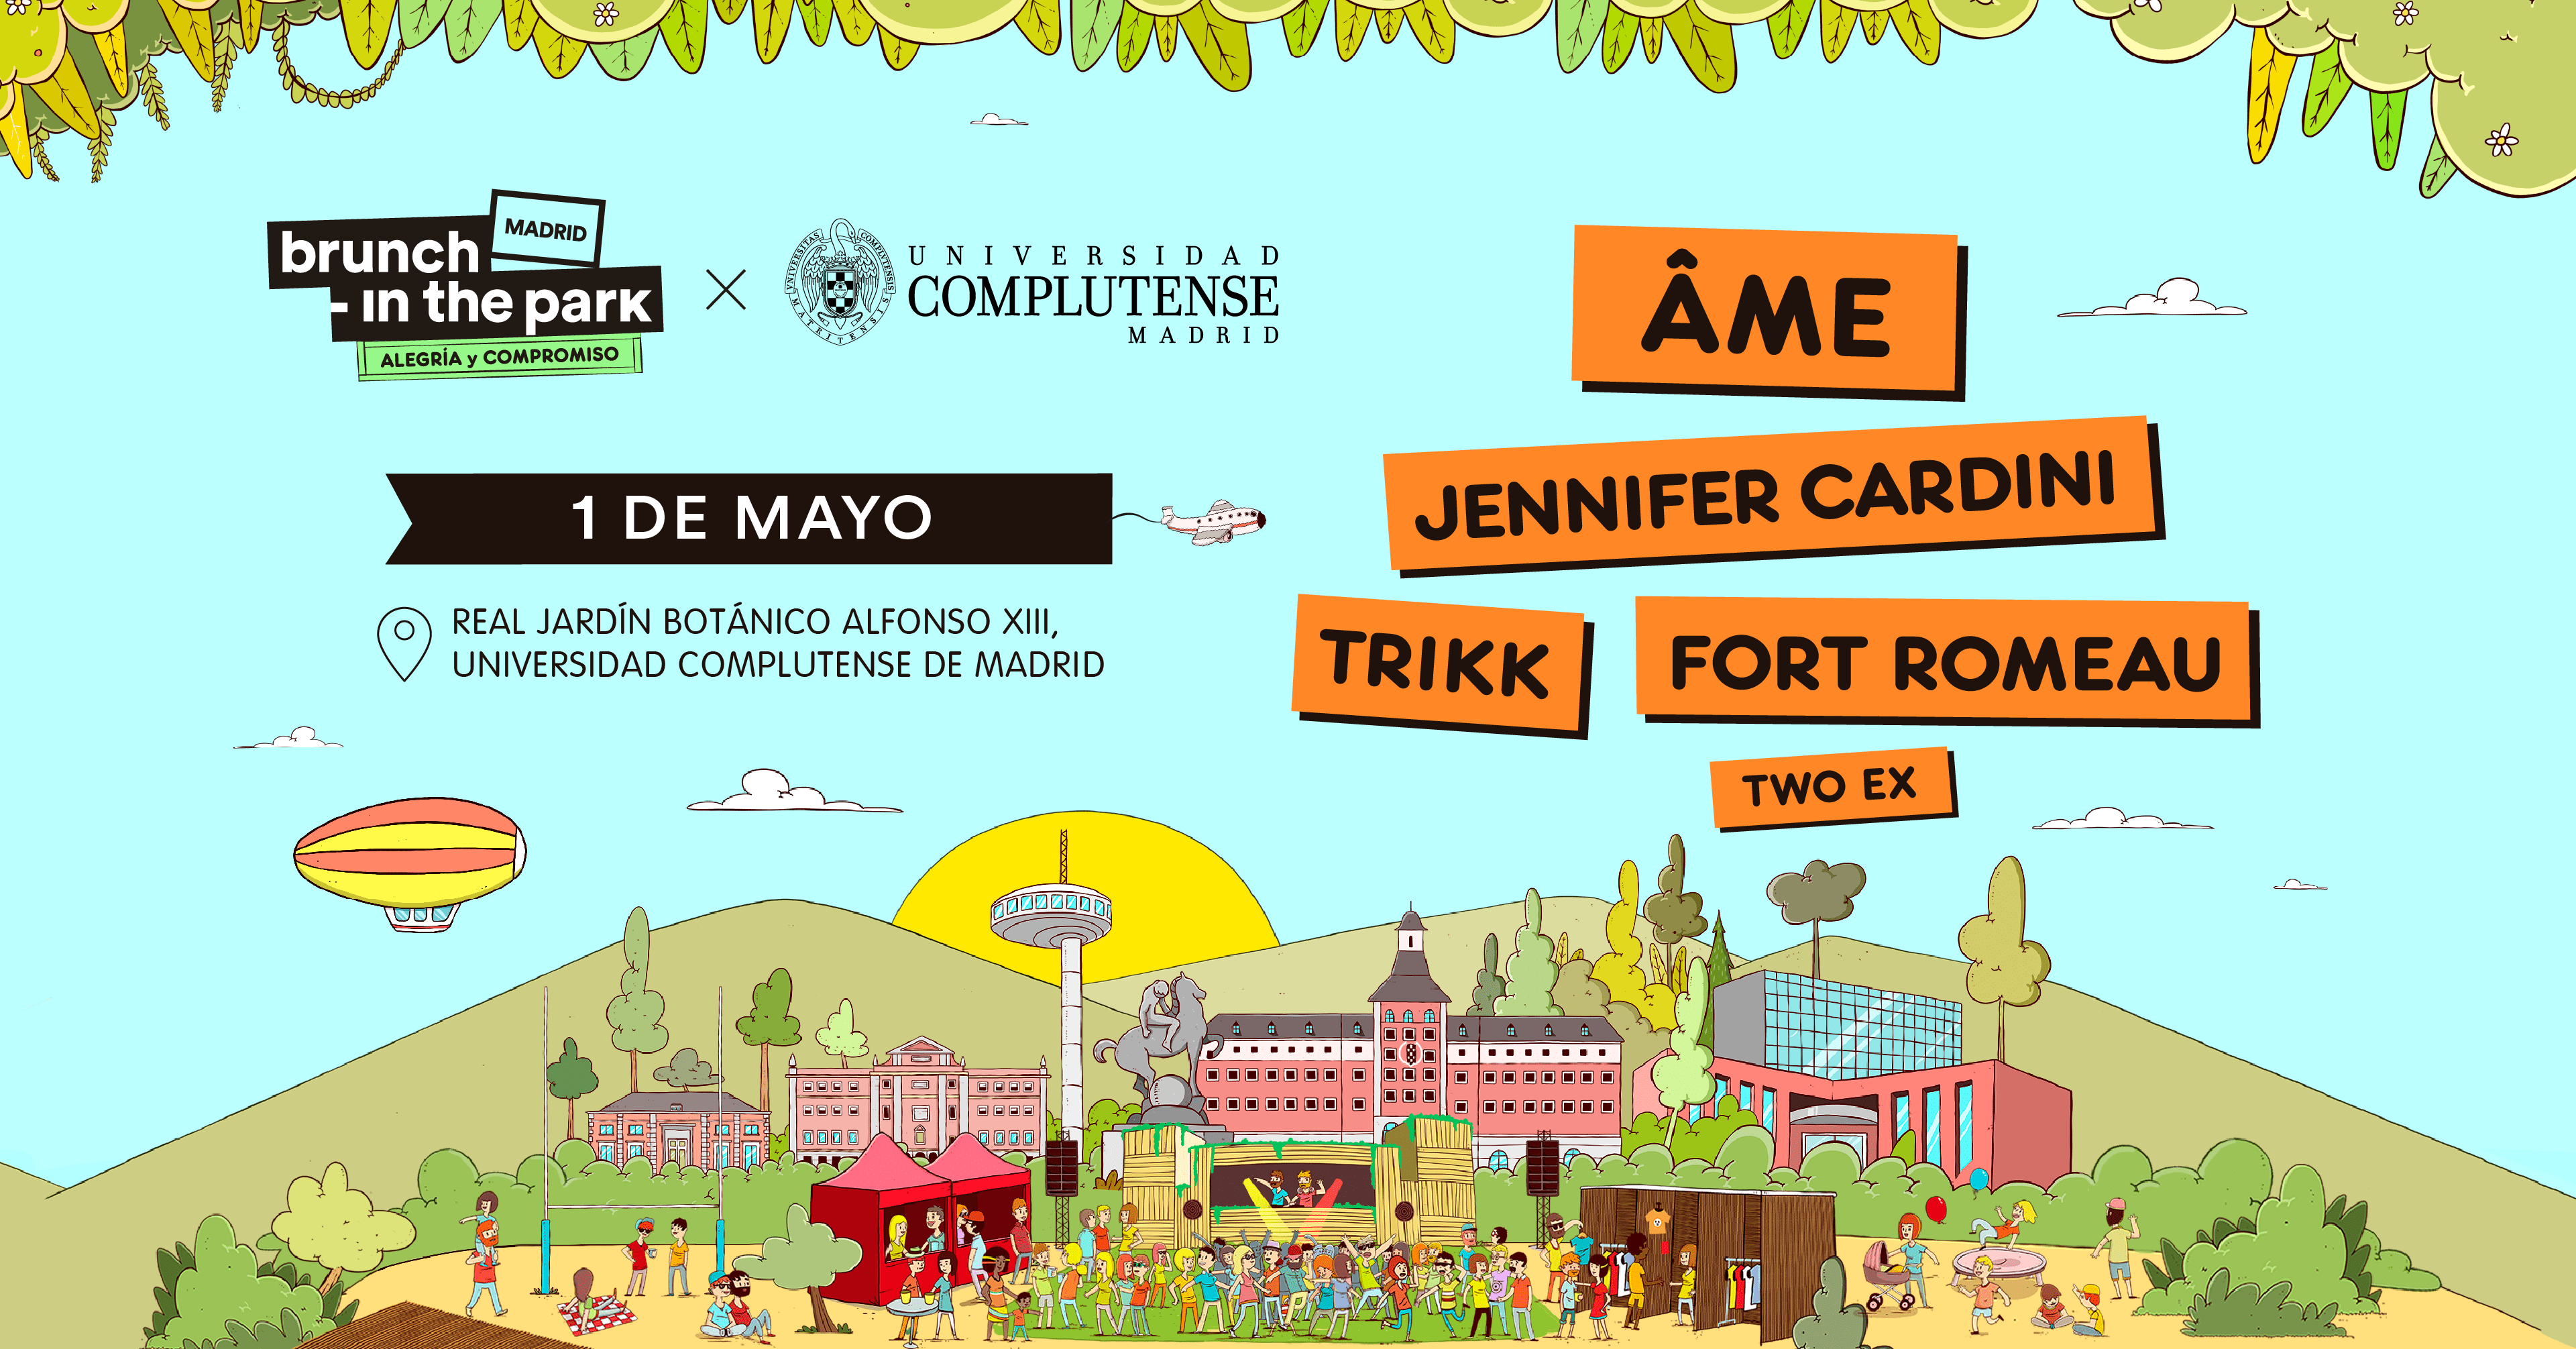 *SOLD OUT* Brunch -In the Park #2 MAD: Âme, Jennifer Cardini, Trikk, Fort Romeau y TWO EX - フライヤー裏